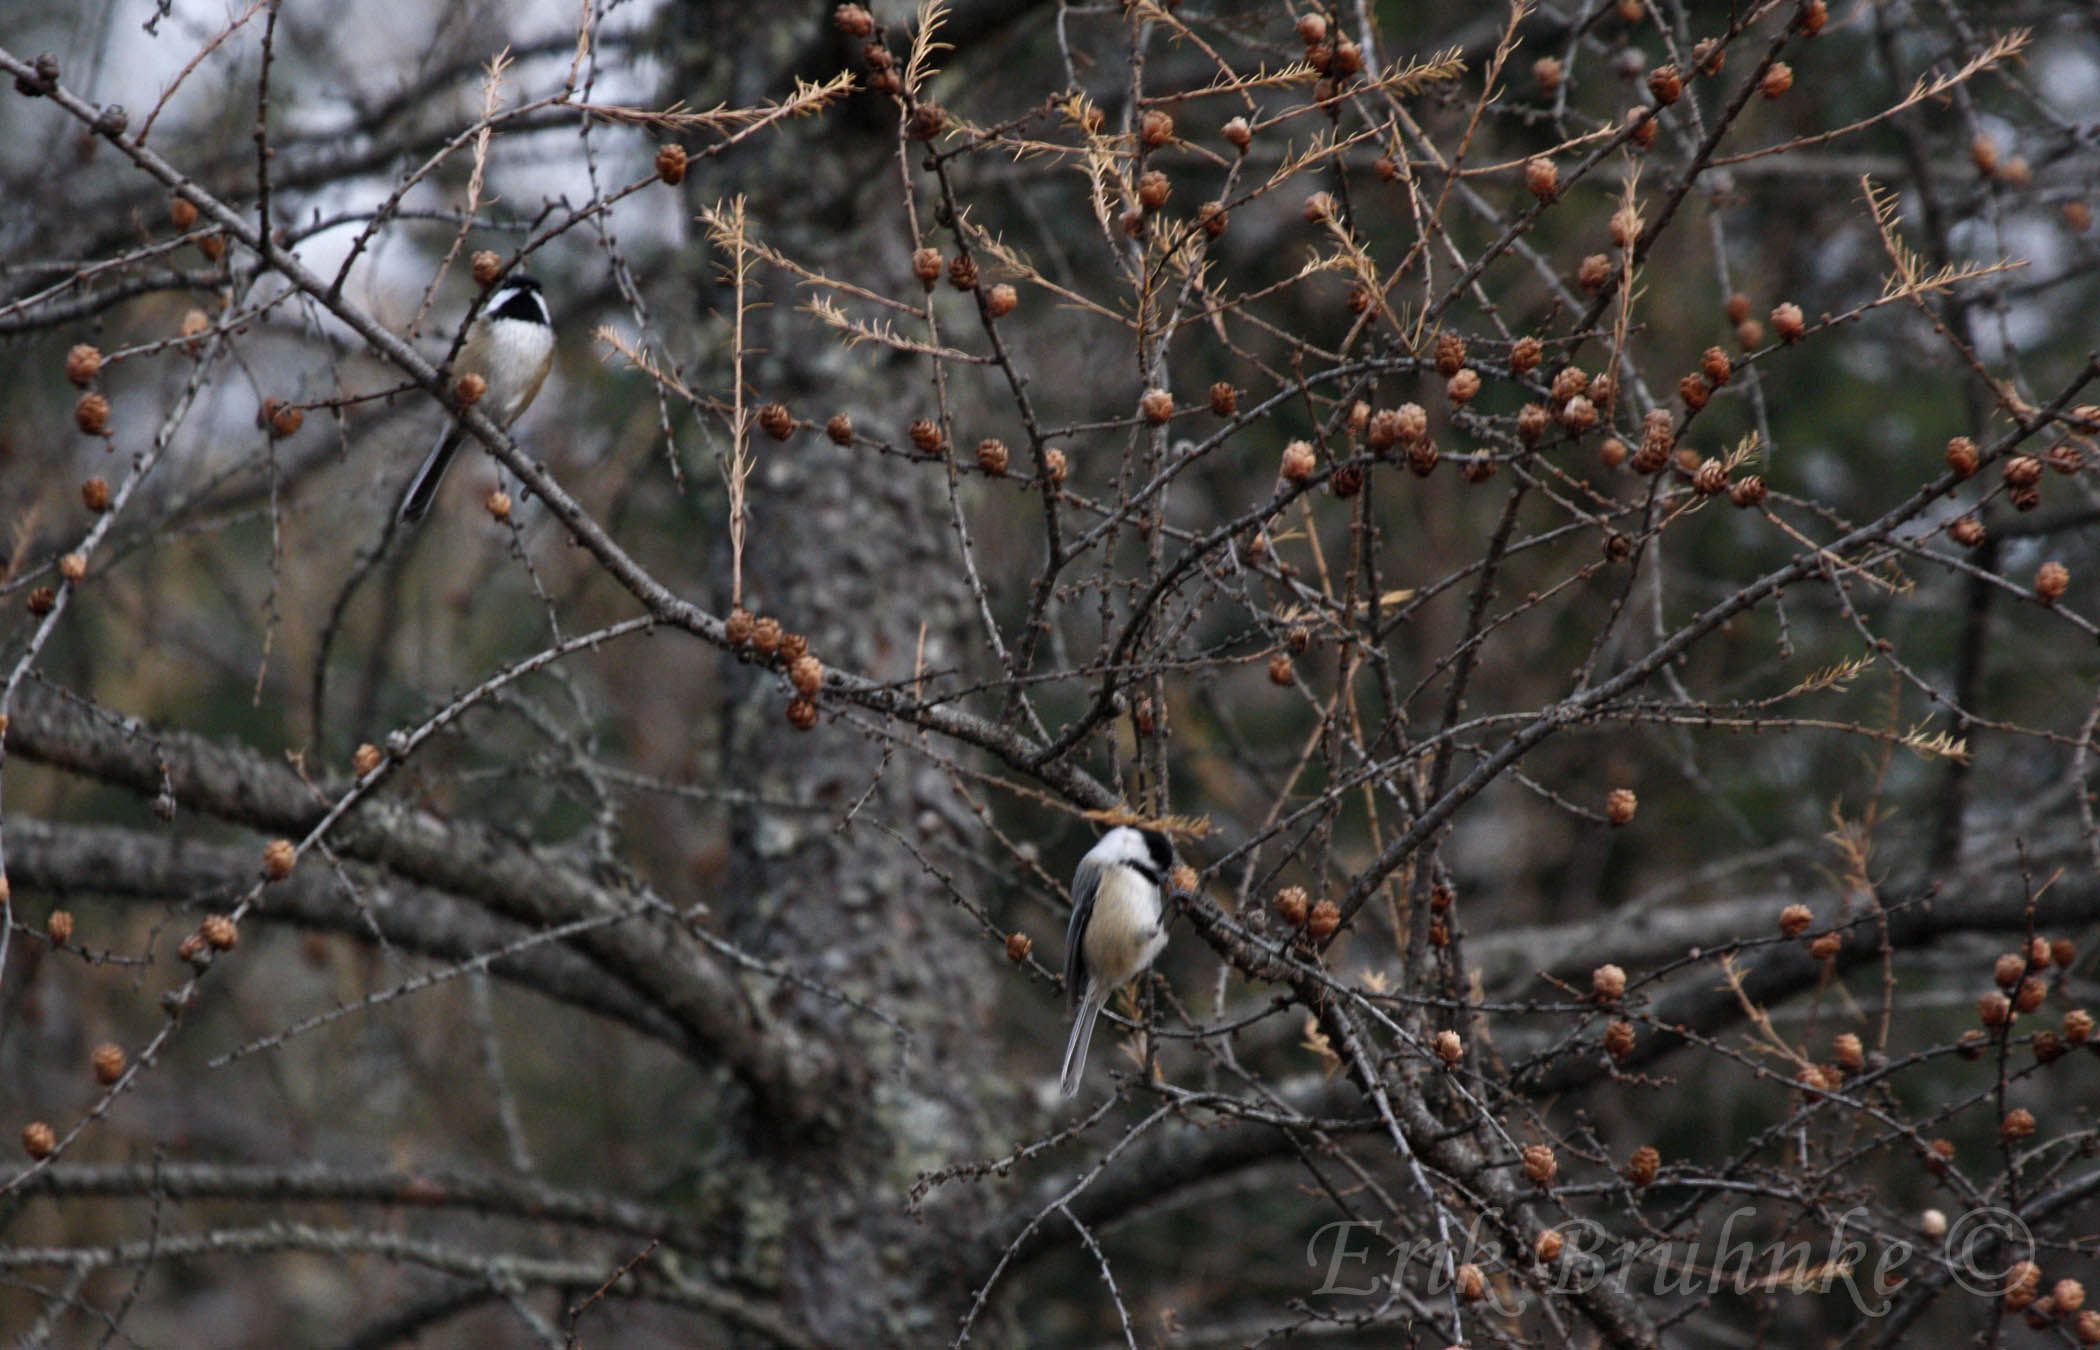 Black-capped Chickadees - two of at least 18 chickadees total!